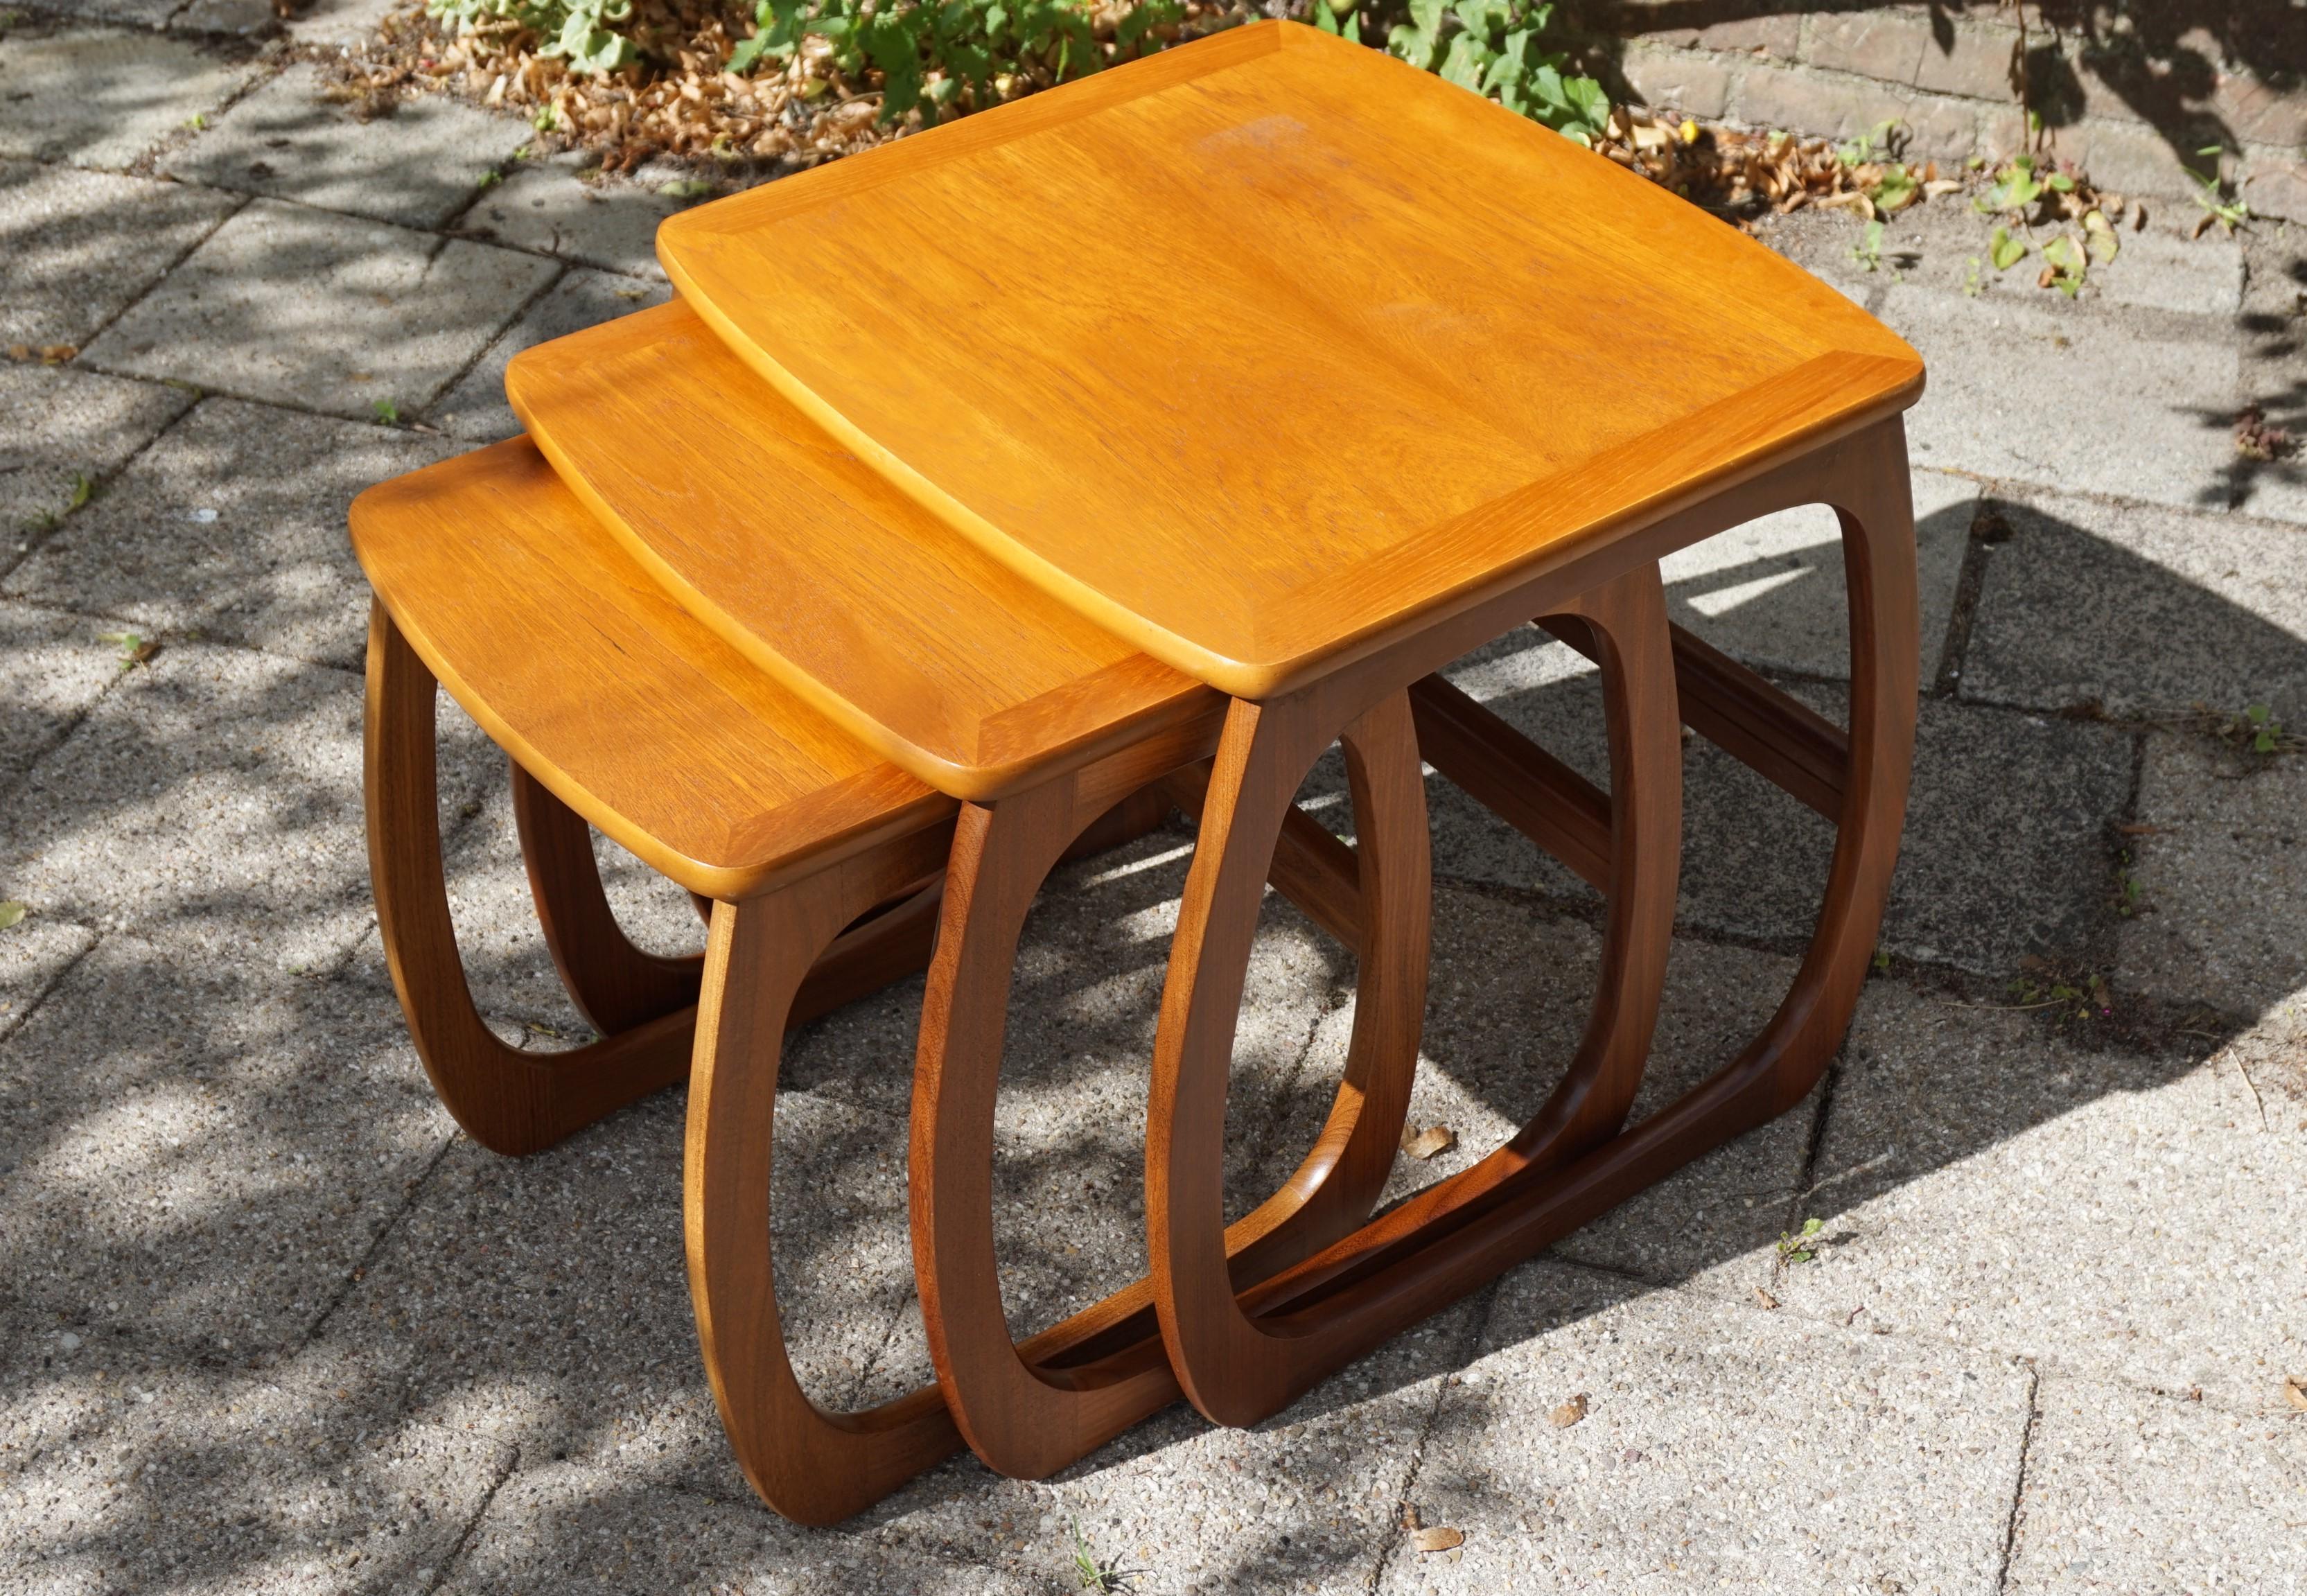 20th Century Stylish & Practical Mid-Century Modern Handmade Afrormosia Wood Nest of Tables For Sale